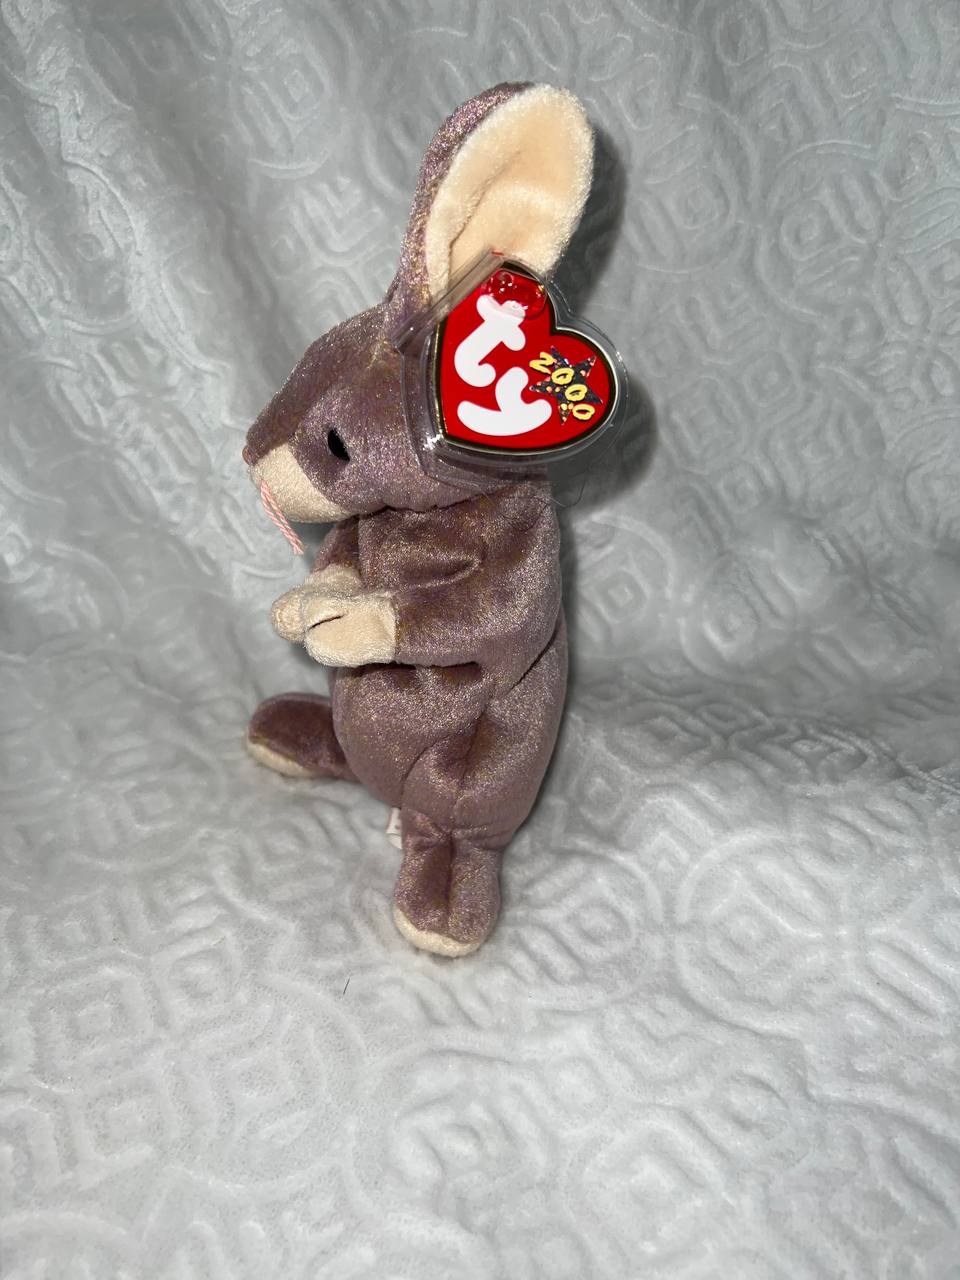 *RARE* MINT Springy Beanie Baby 2000 With Tag